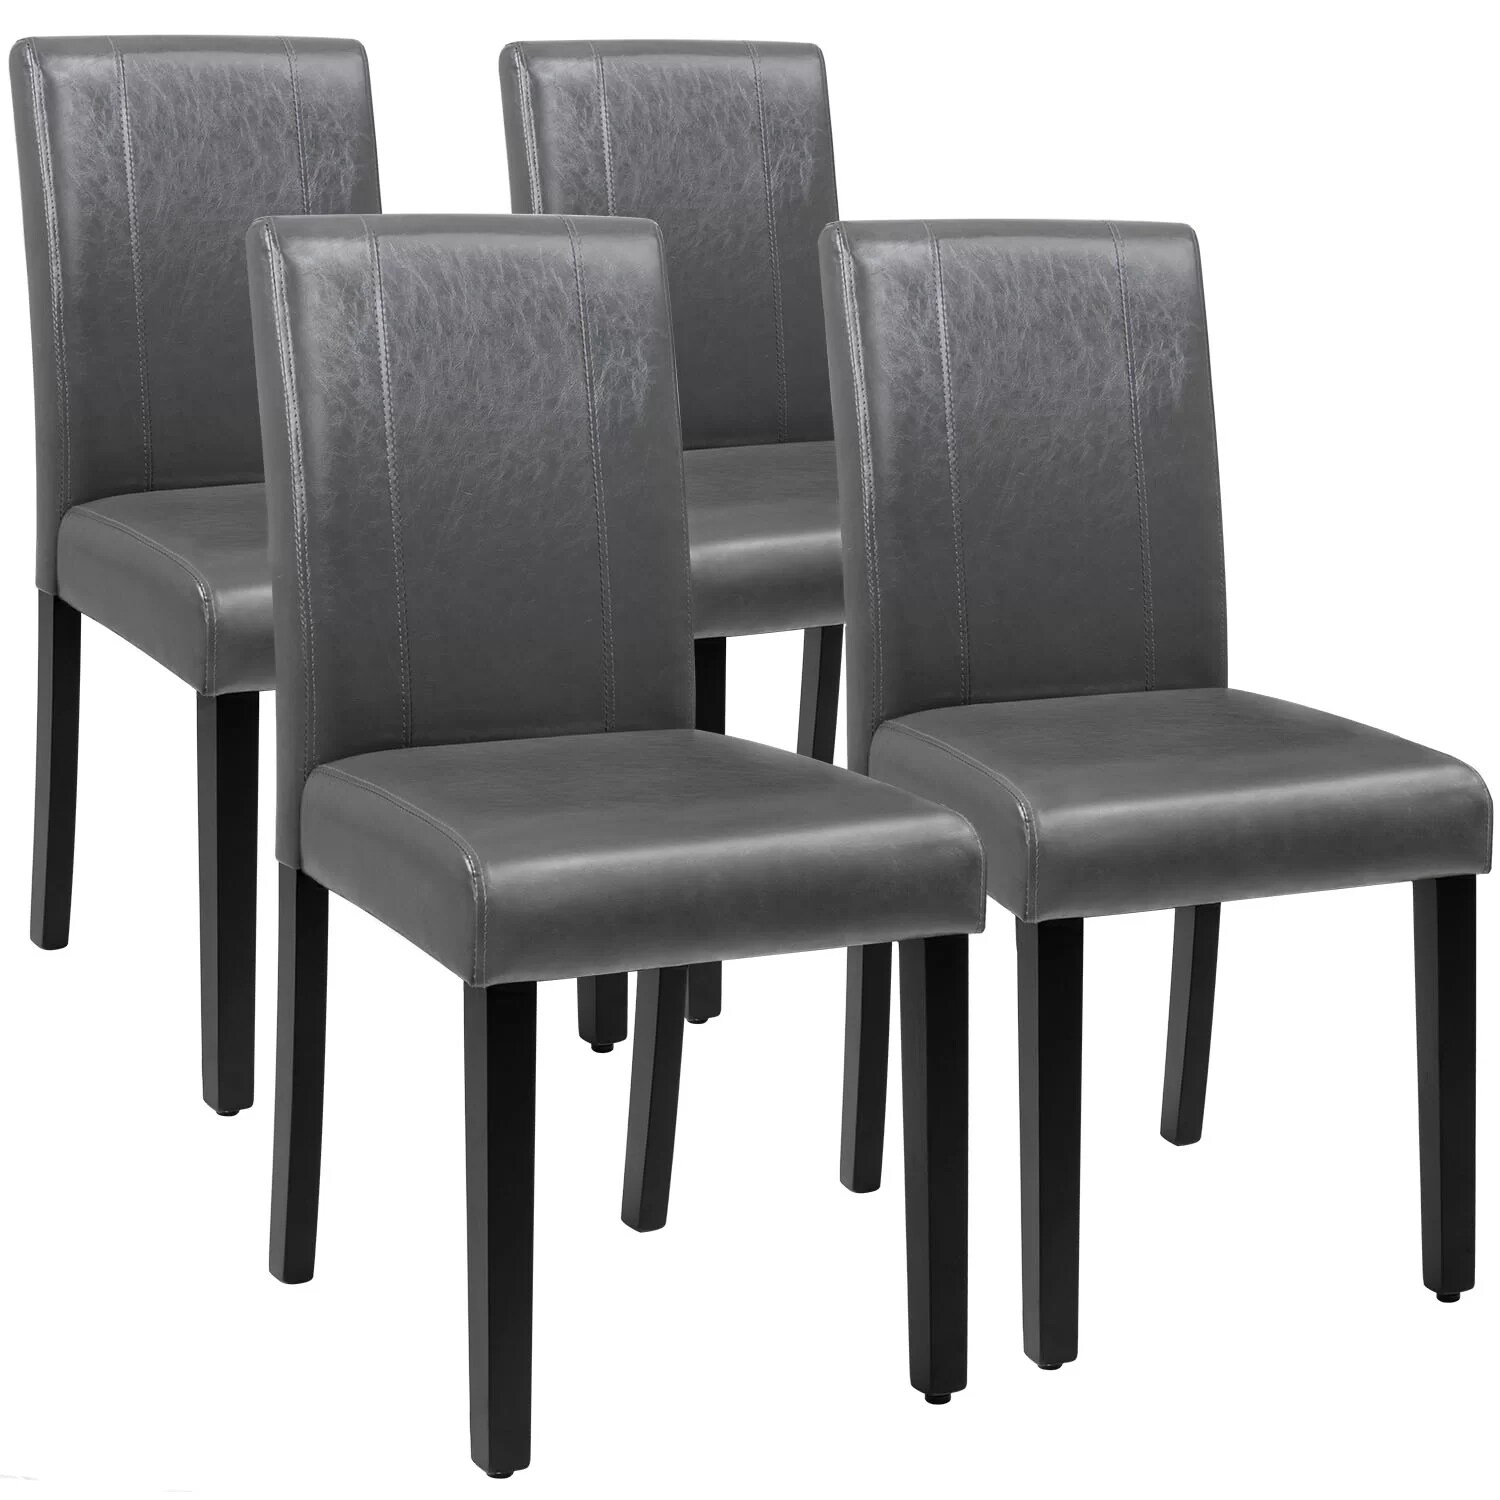 Dining Chairs at Lowes.com